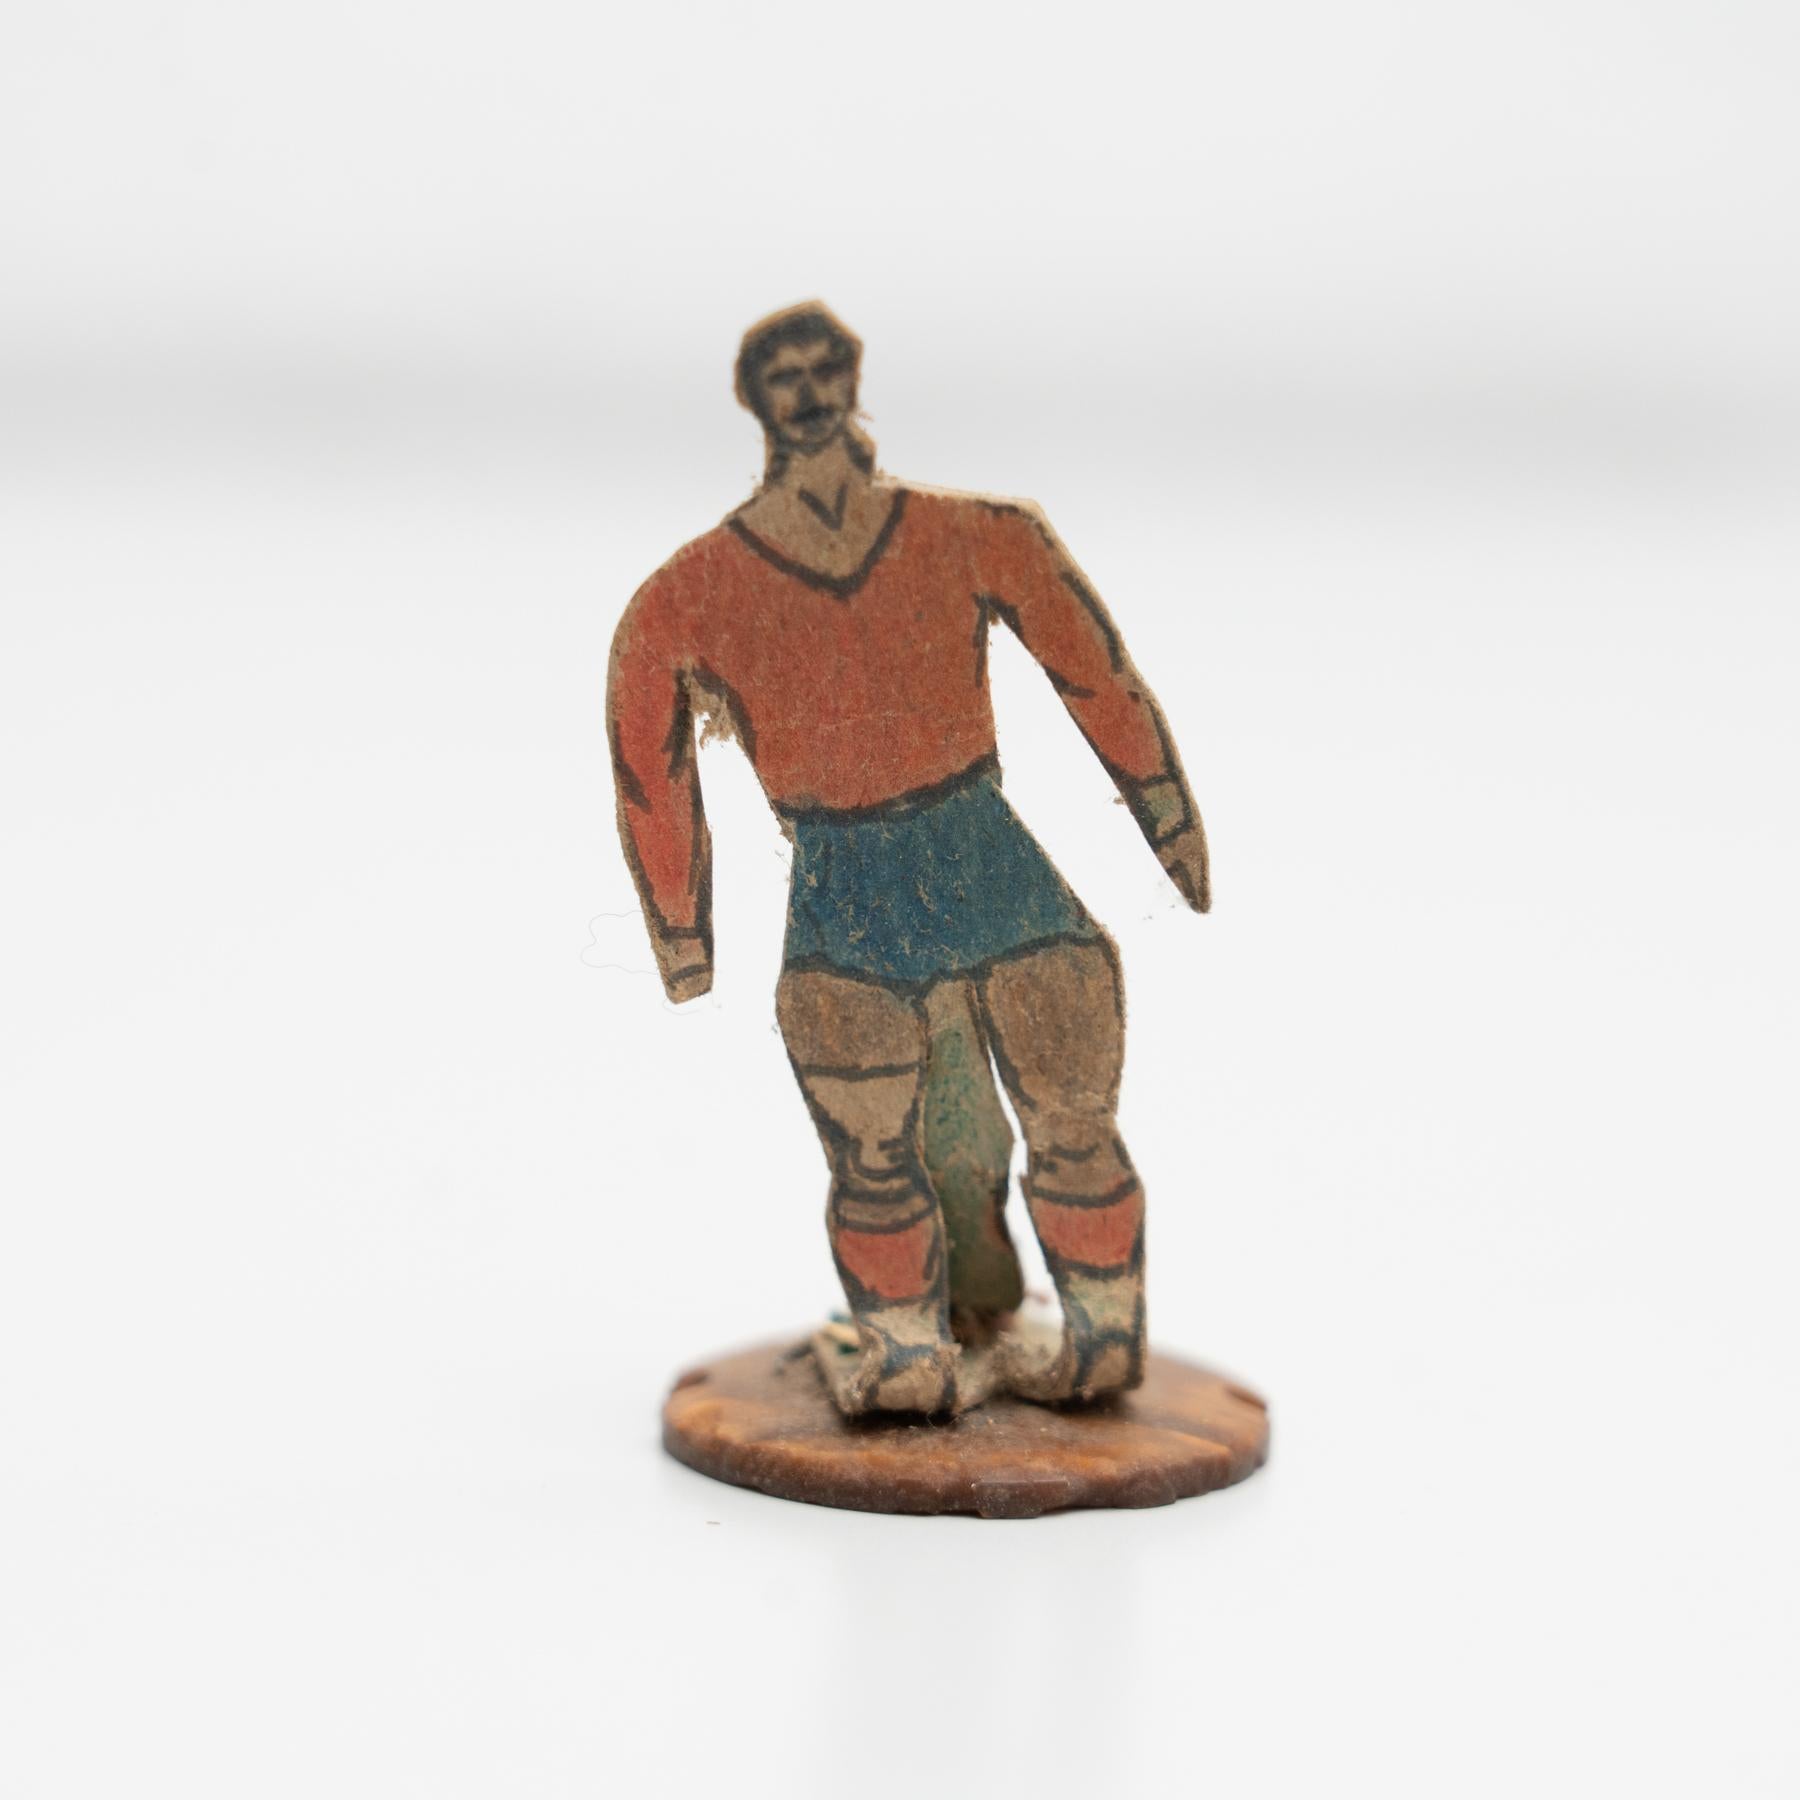 Set of 6 Traditional Antique Button Soccer Game Figures, circa 1950 In Good Condition For Sale In Barcelona, Barcelona